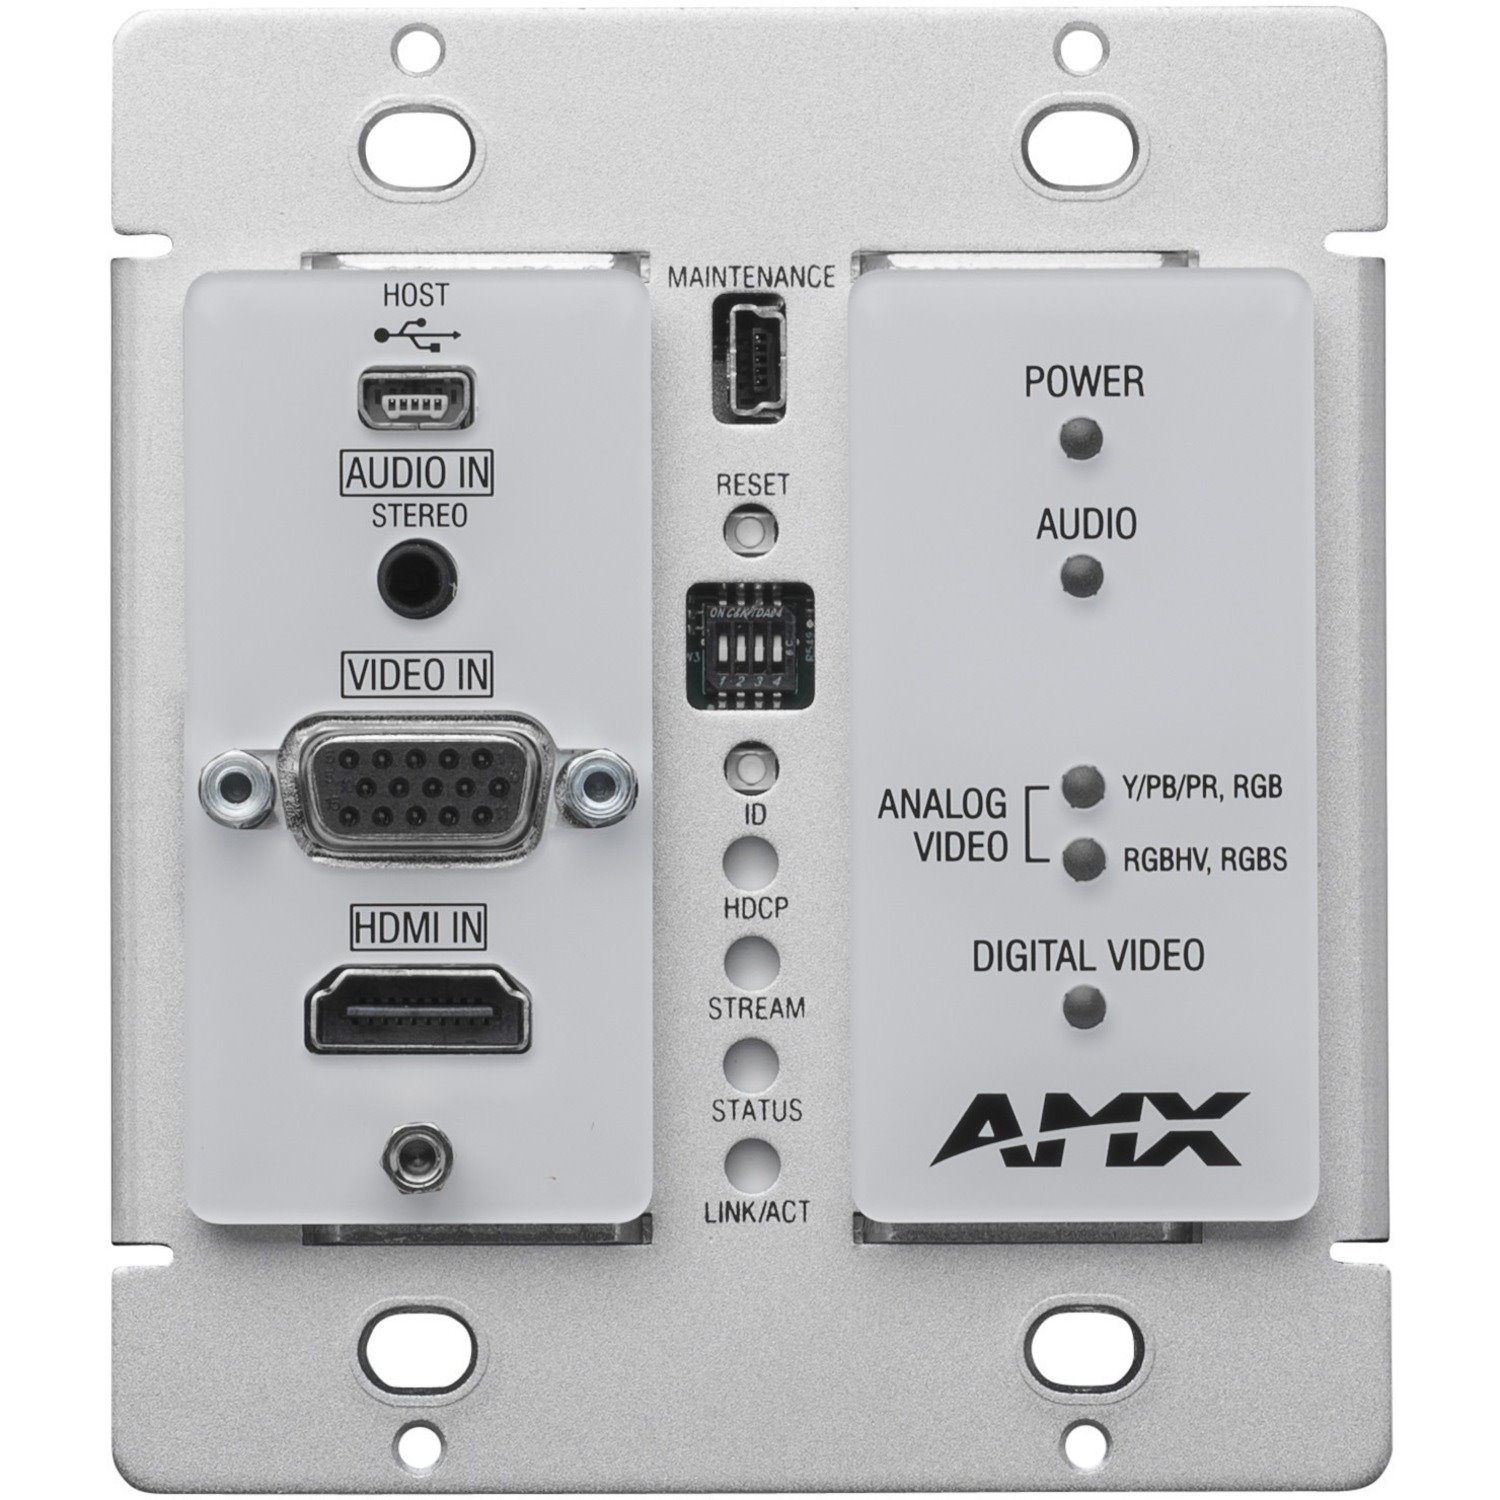 AMX N2300 Series 4K UHD Video Over IP Decor Style Wallplate Encoder with KVM, PoE